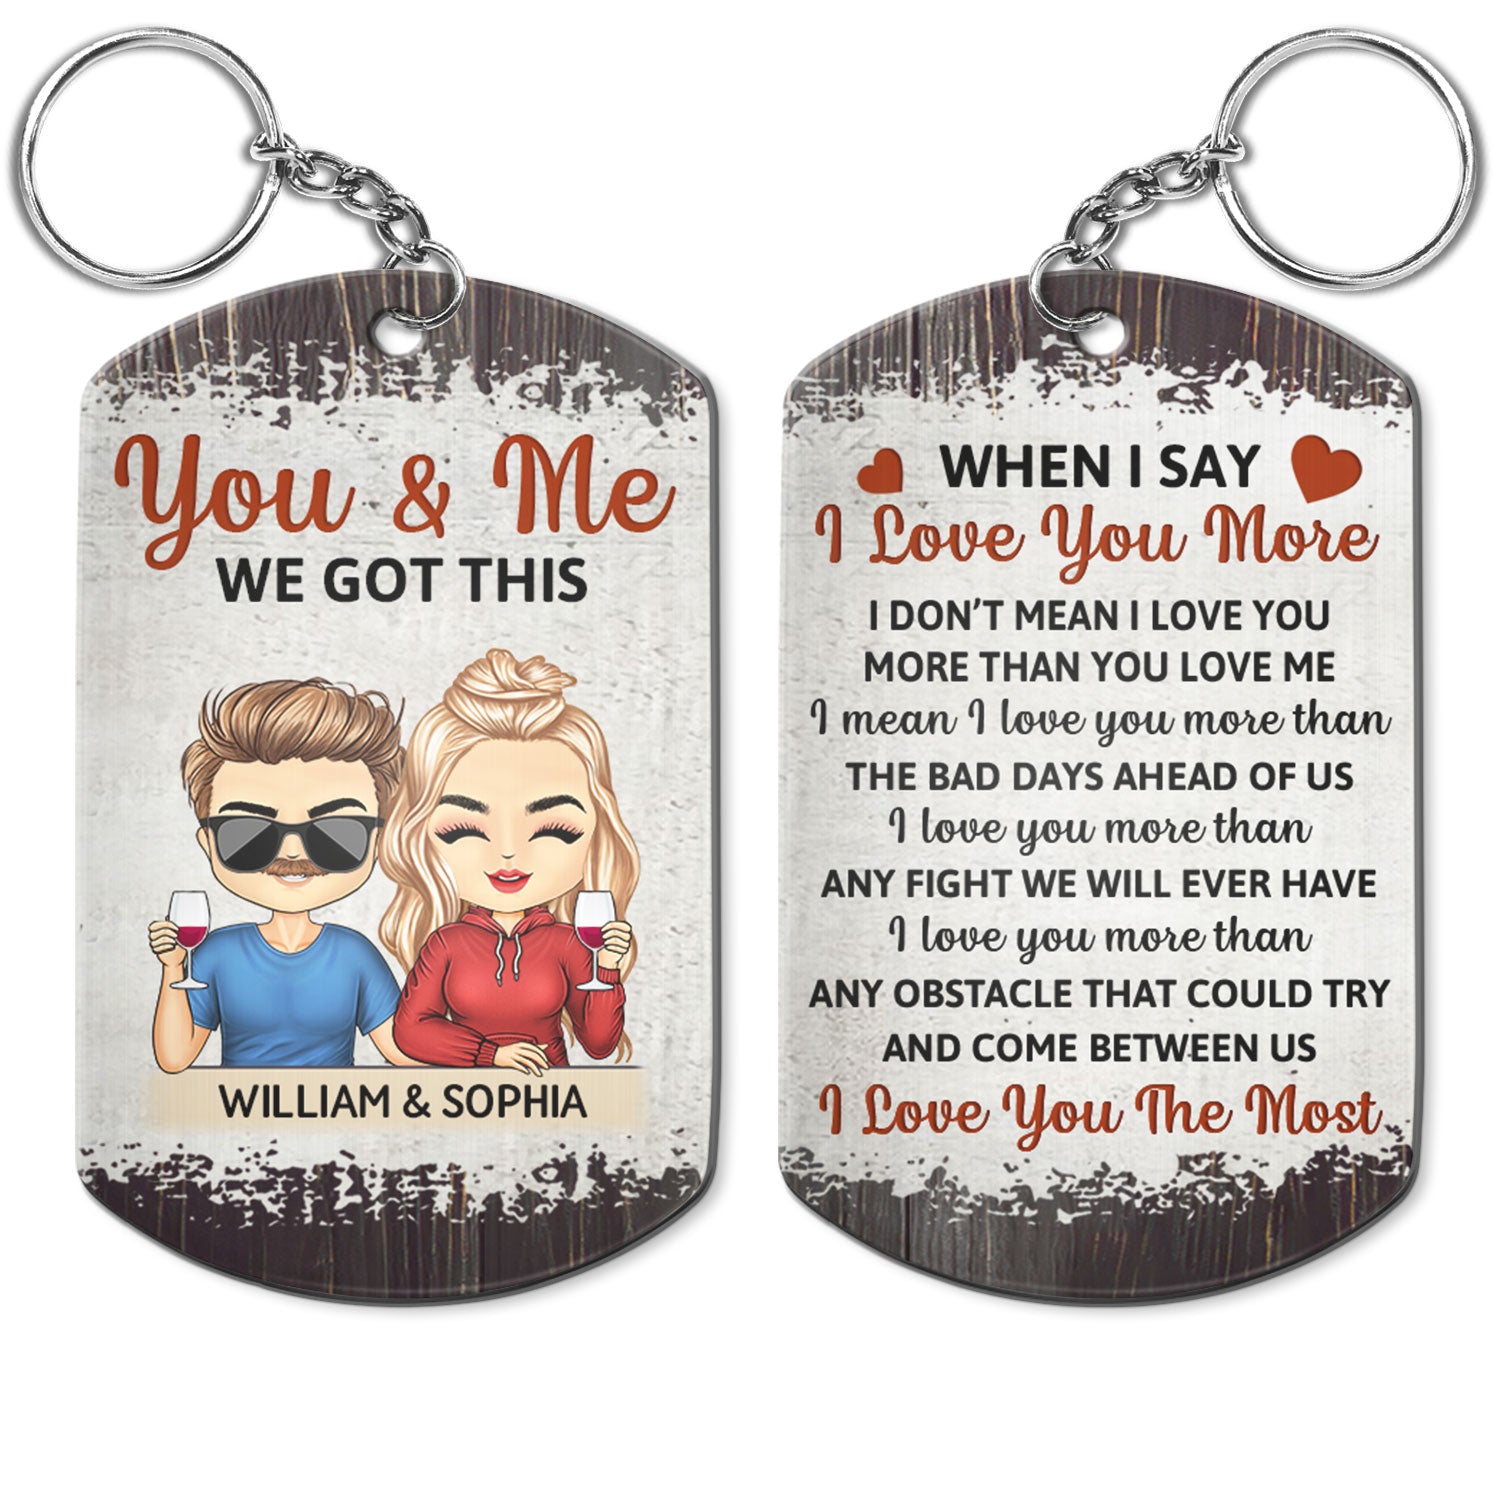 When I Say I Love You More Chibi - Anniversary, Vacation, Funny Gift For Couples, Family - Personalized Aluminum Keychain